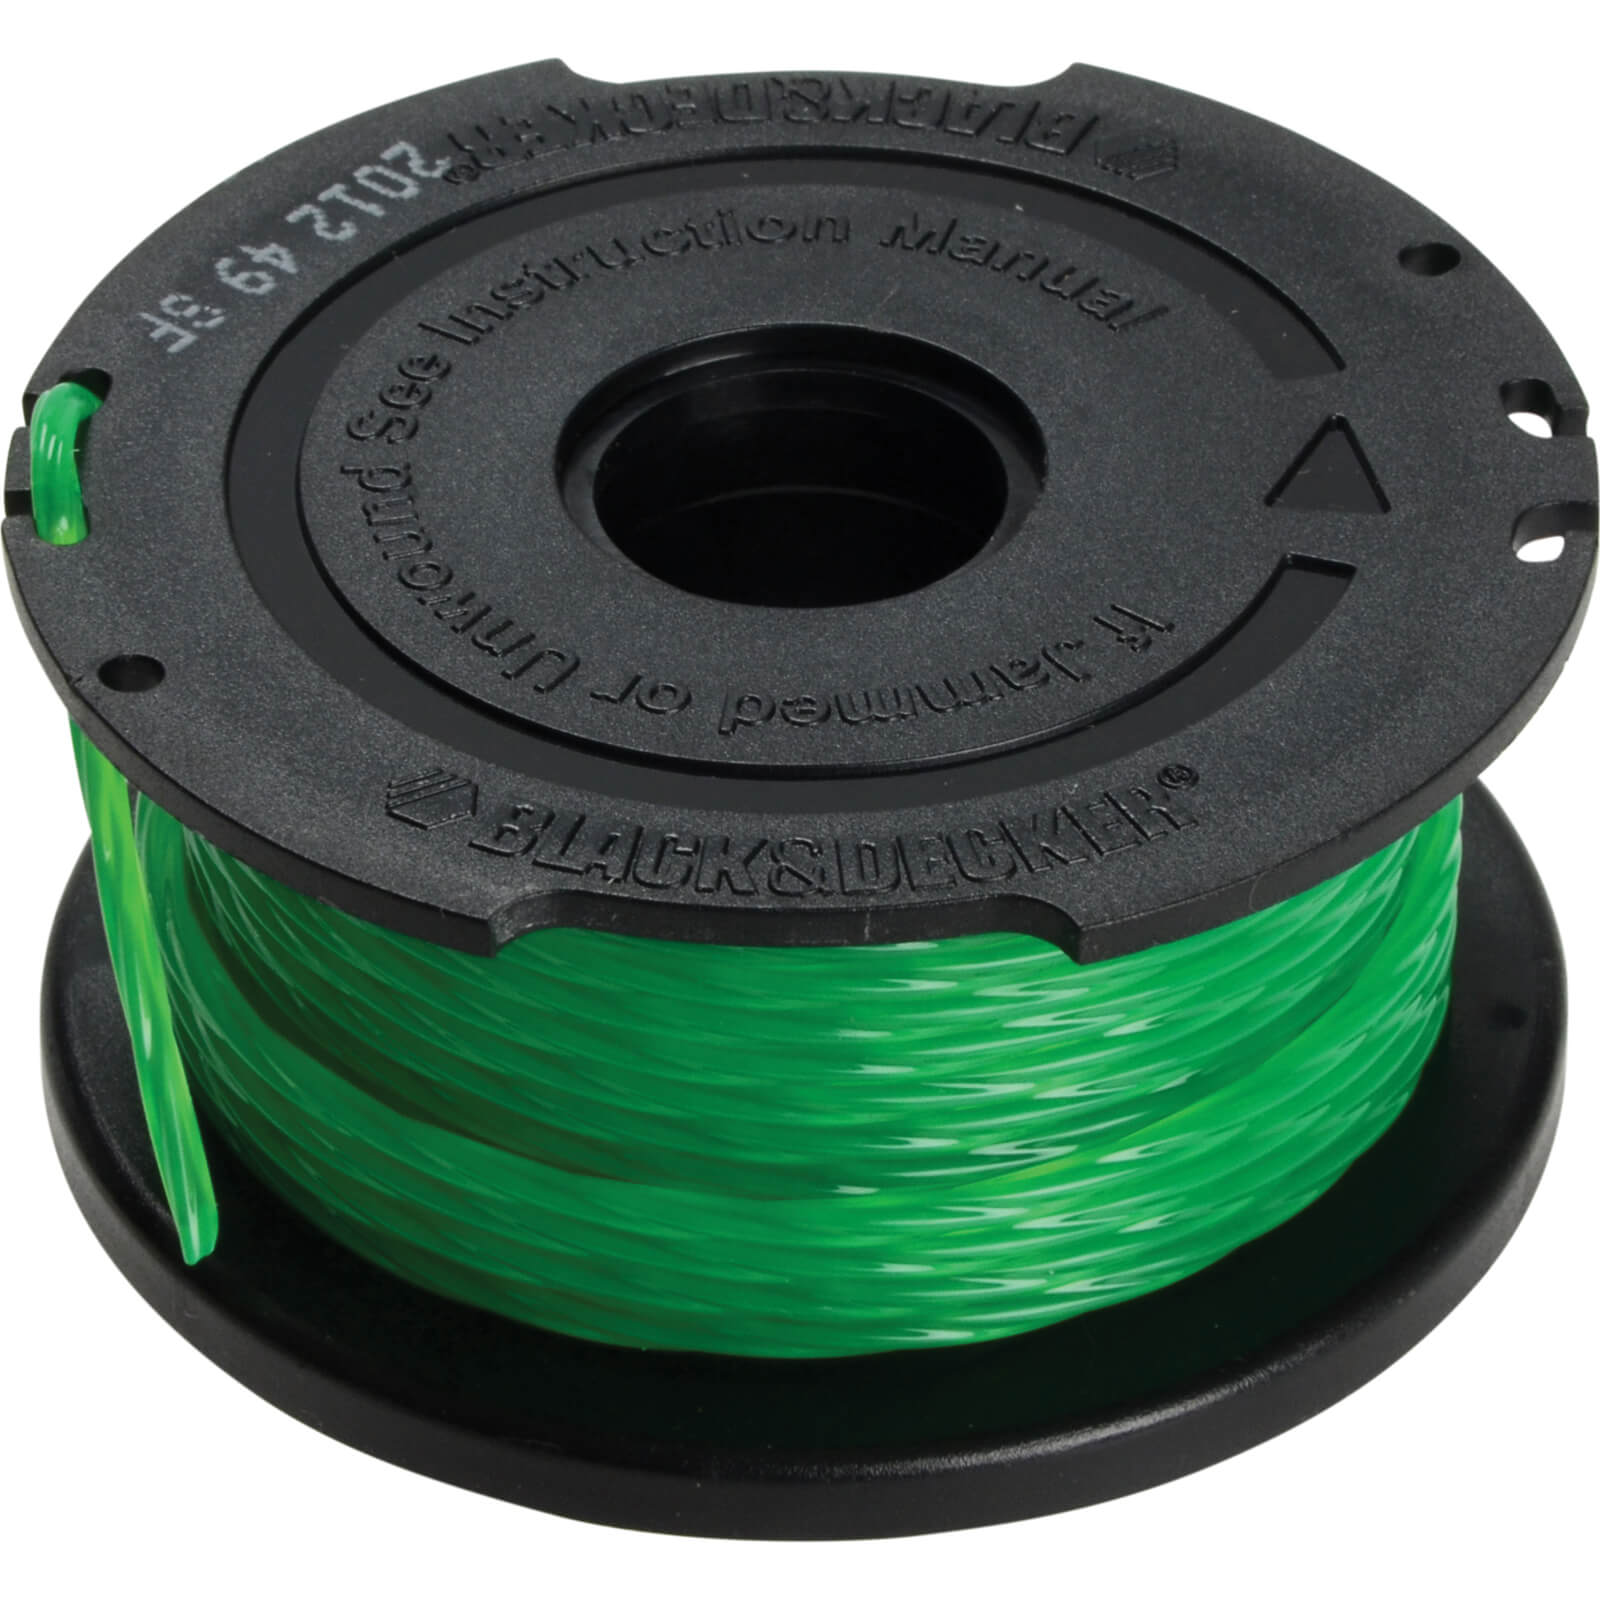 Black & Decker A6482 Replacement AFS Spool & 2mm Line for GL7033, GL8033 & GL9035 Grass Trimmers